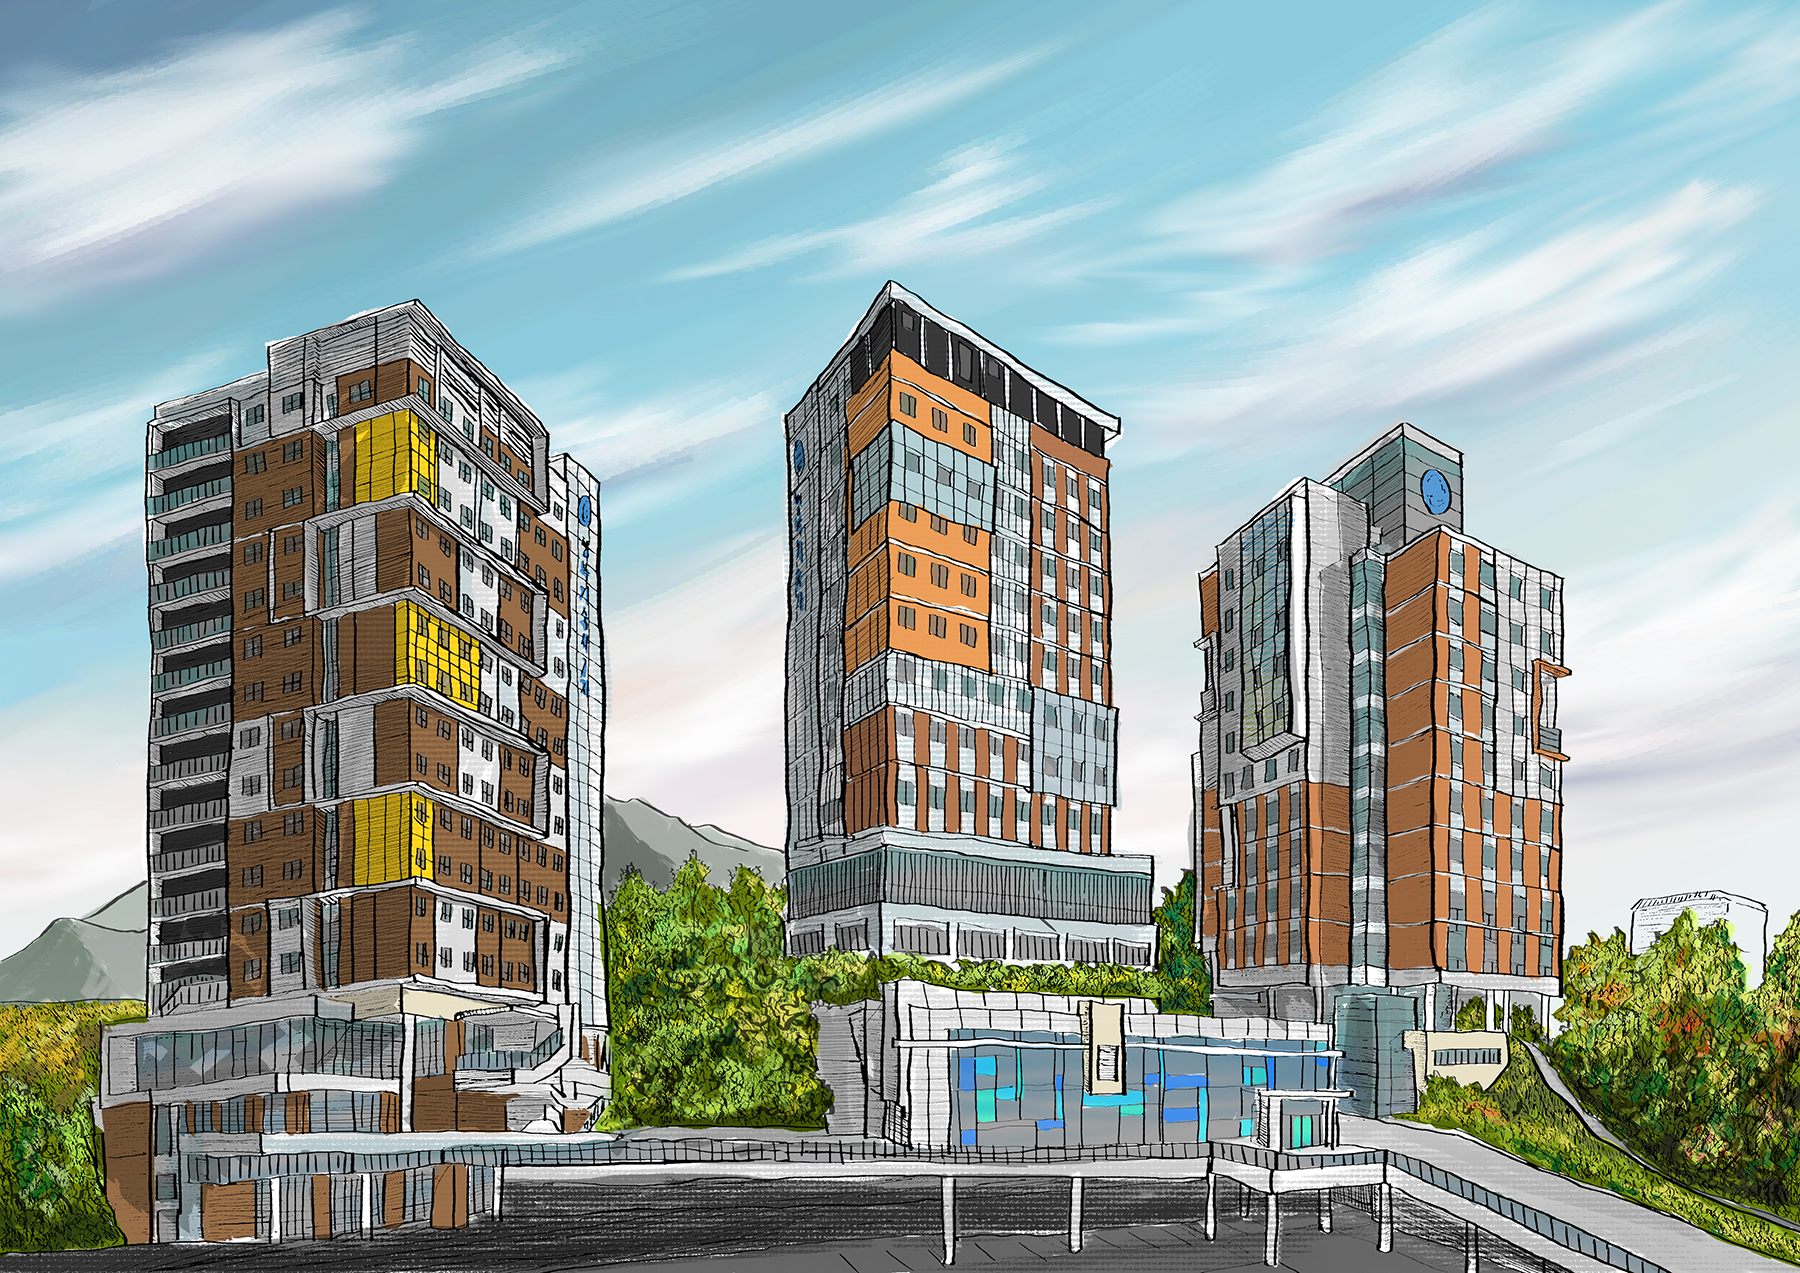 It shows a exterior perspective rendering that illustrates three buildings.